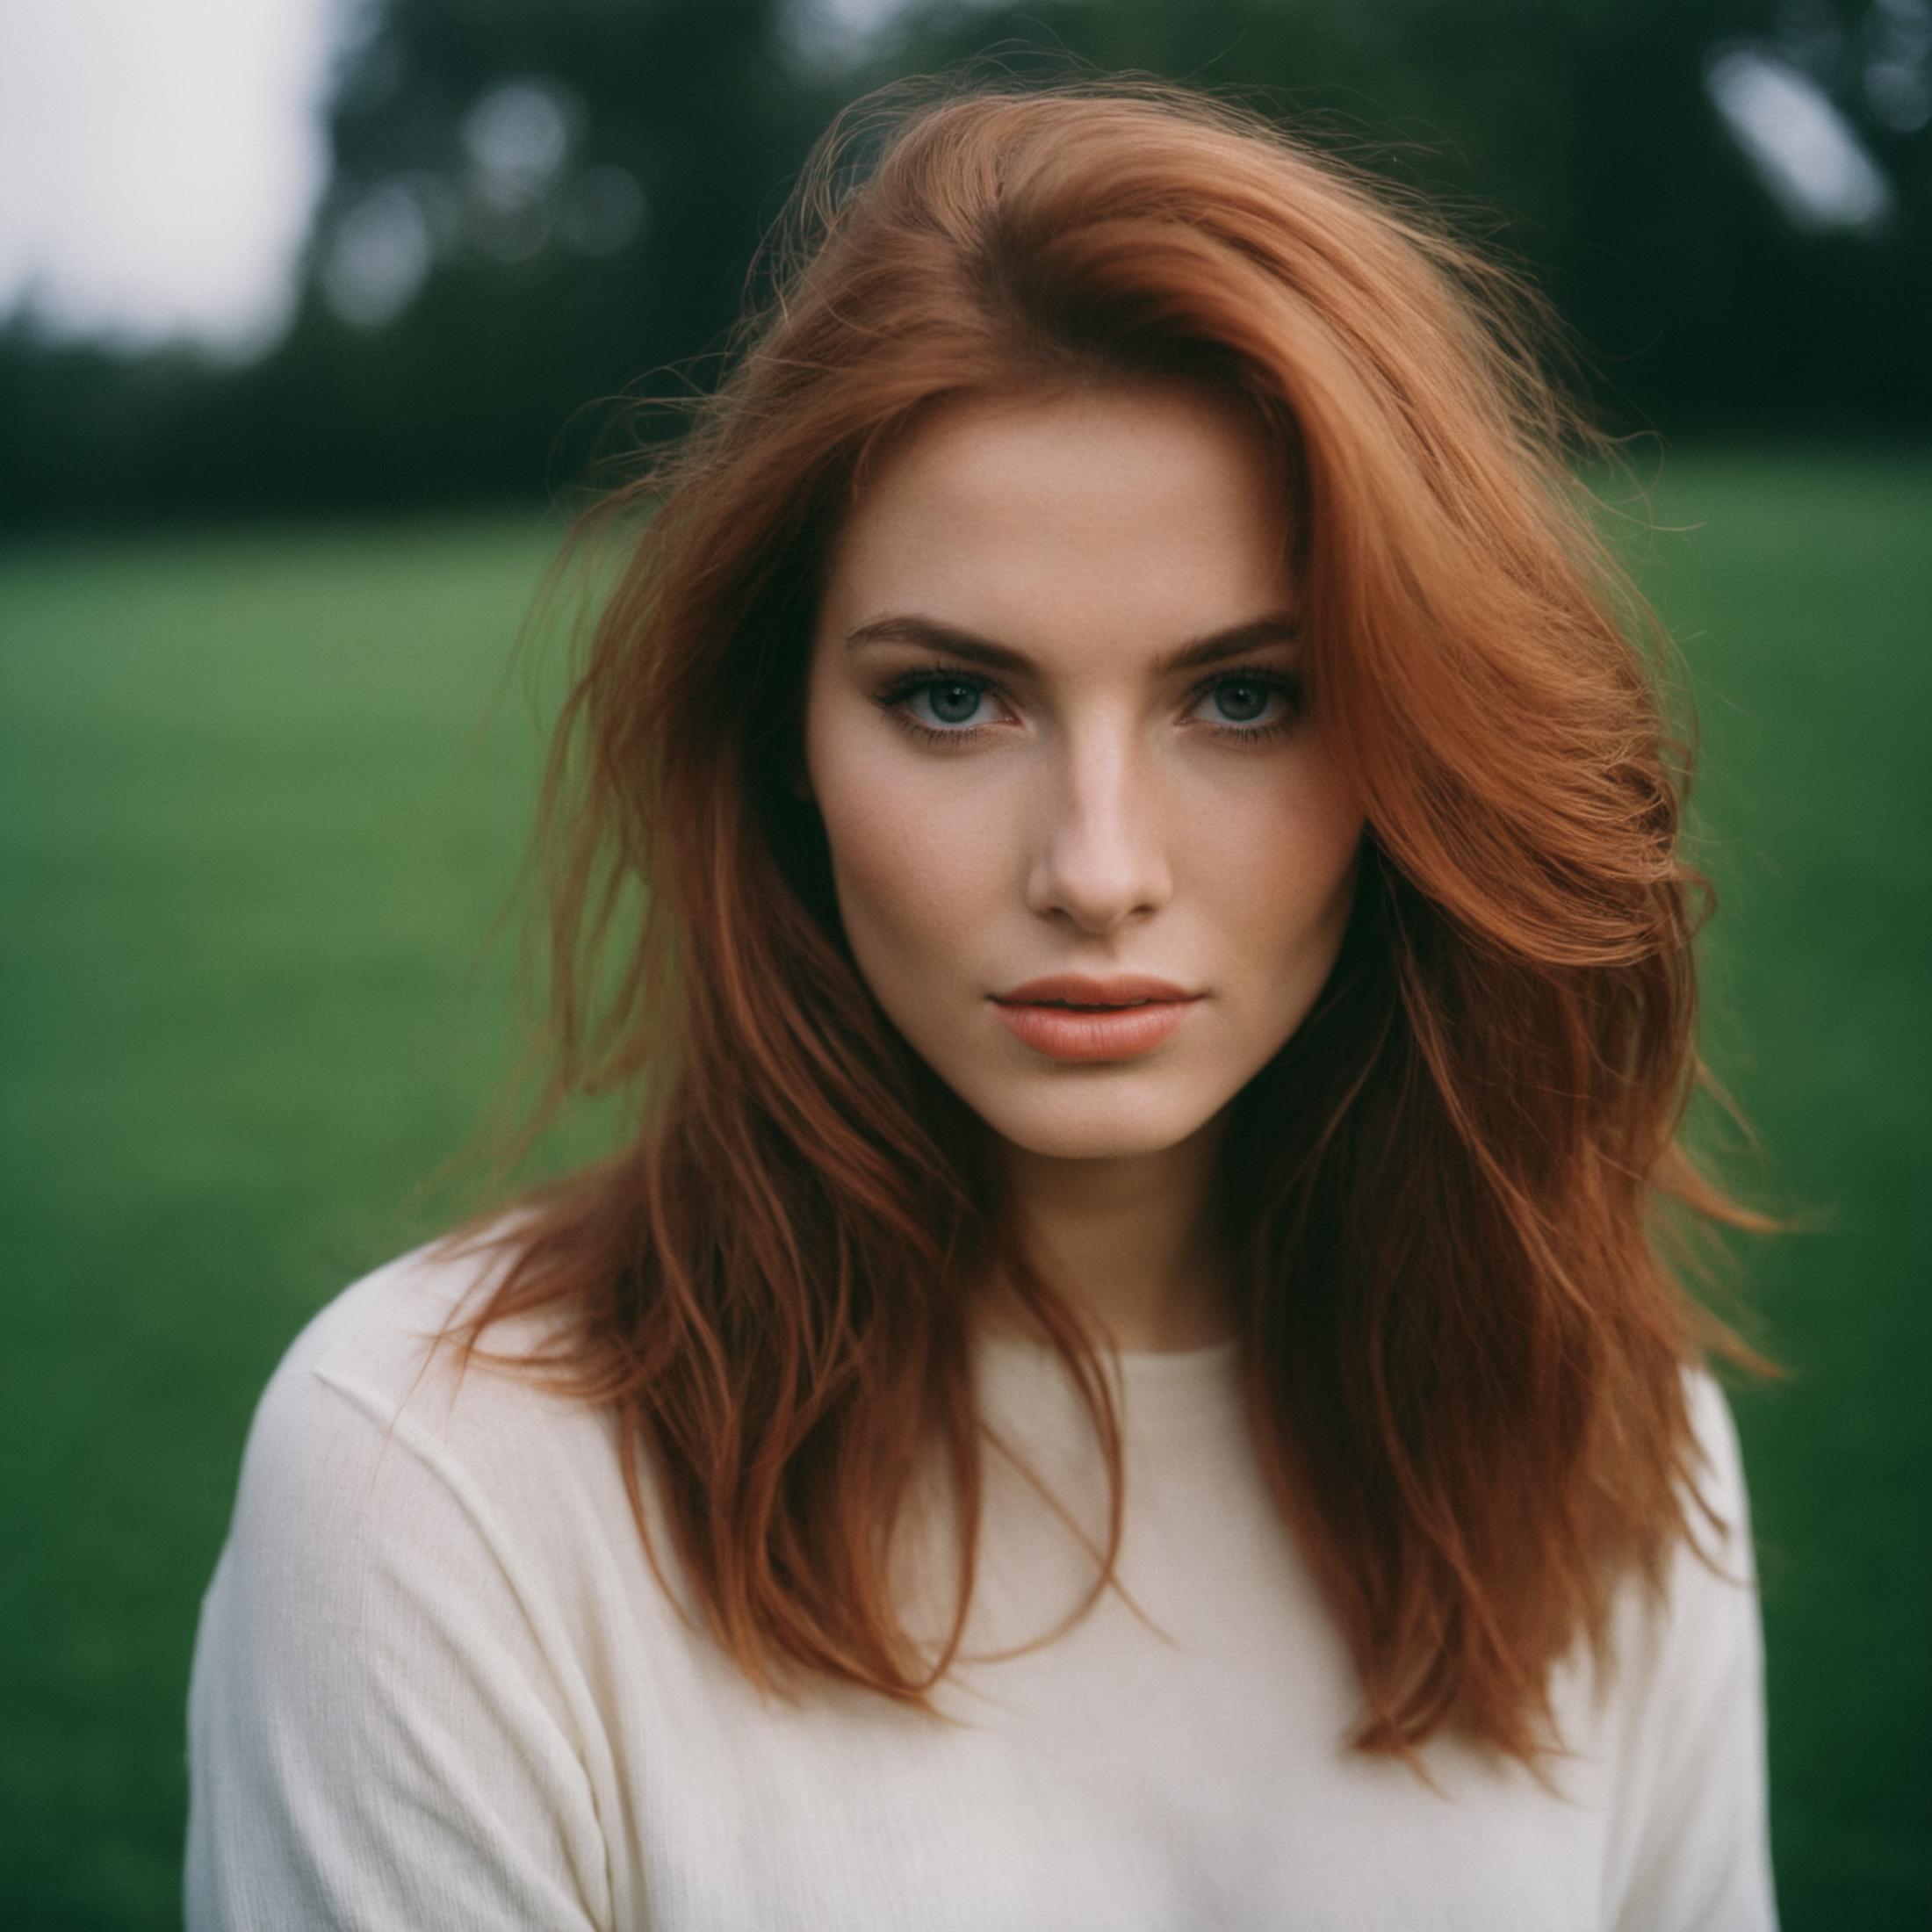 A beautiful red-haired woman wearing a white top poses in a grassy field.